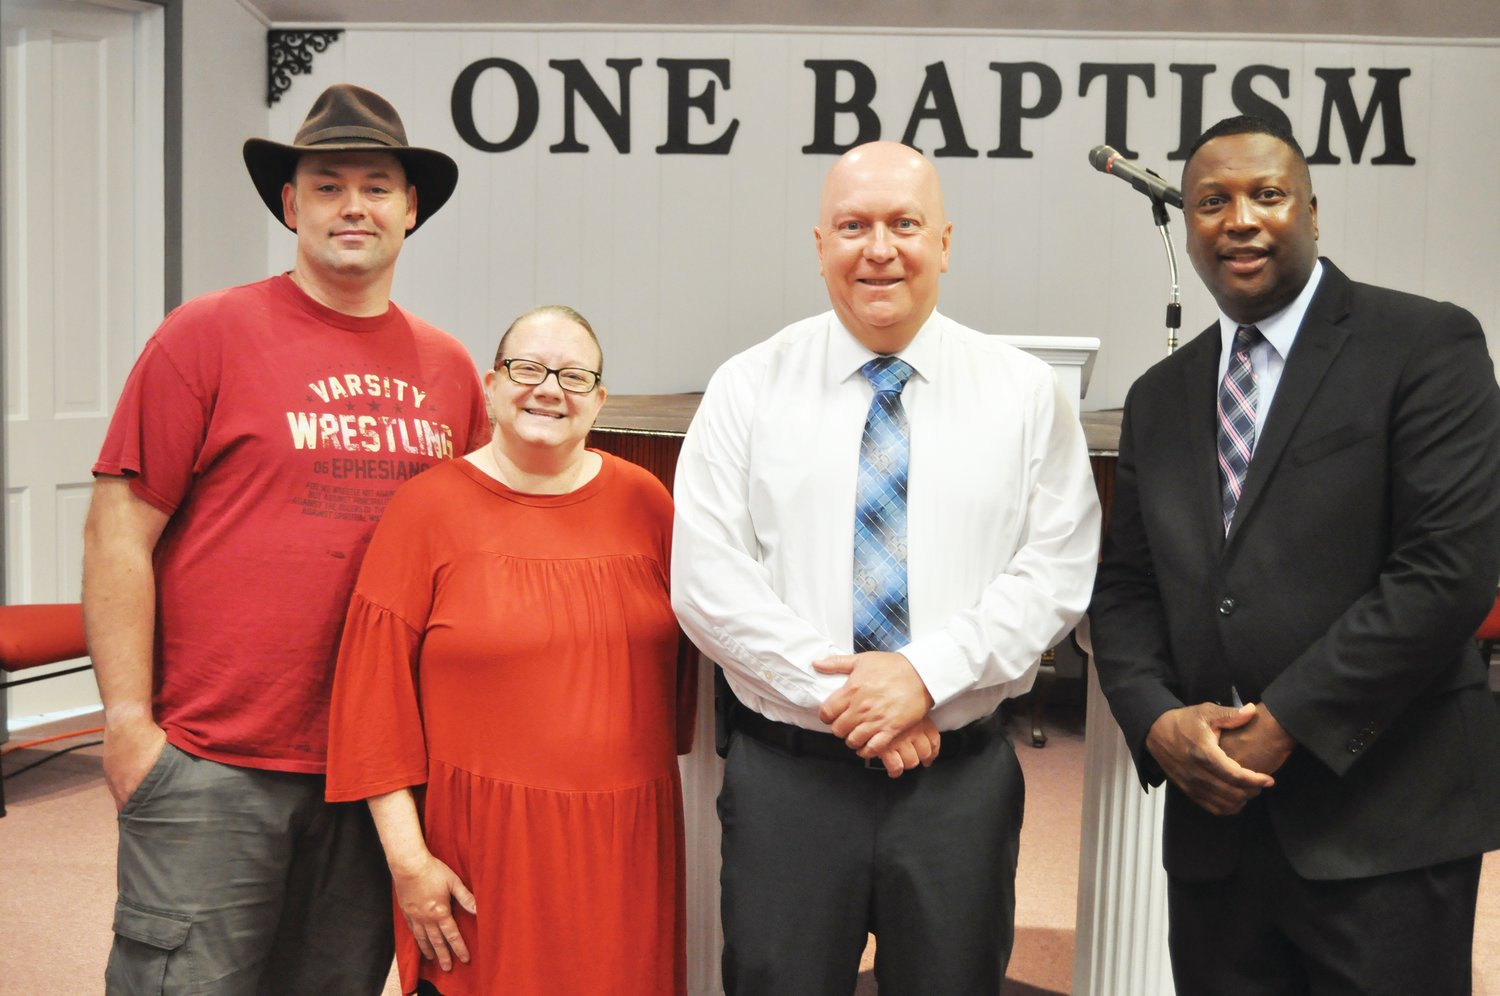 Crawfordsville Mayor Todd Barton made a visit to One Way Pentecostal Apostolic Church on Tuesday. Standing with Barton, from left, is Chad Arthur, Tawenis Arthur and Pastor Steven Lee.